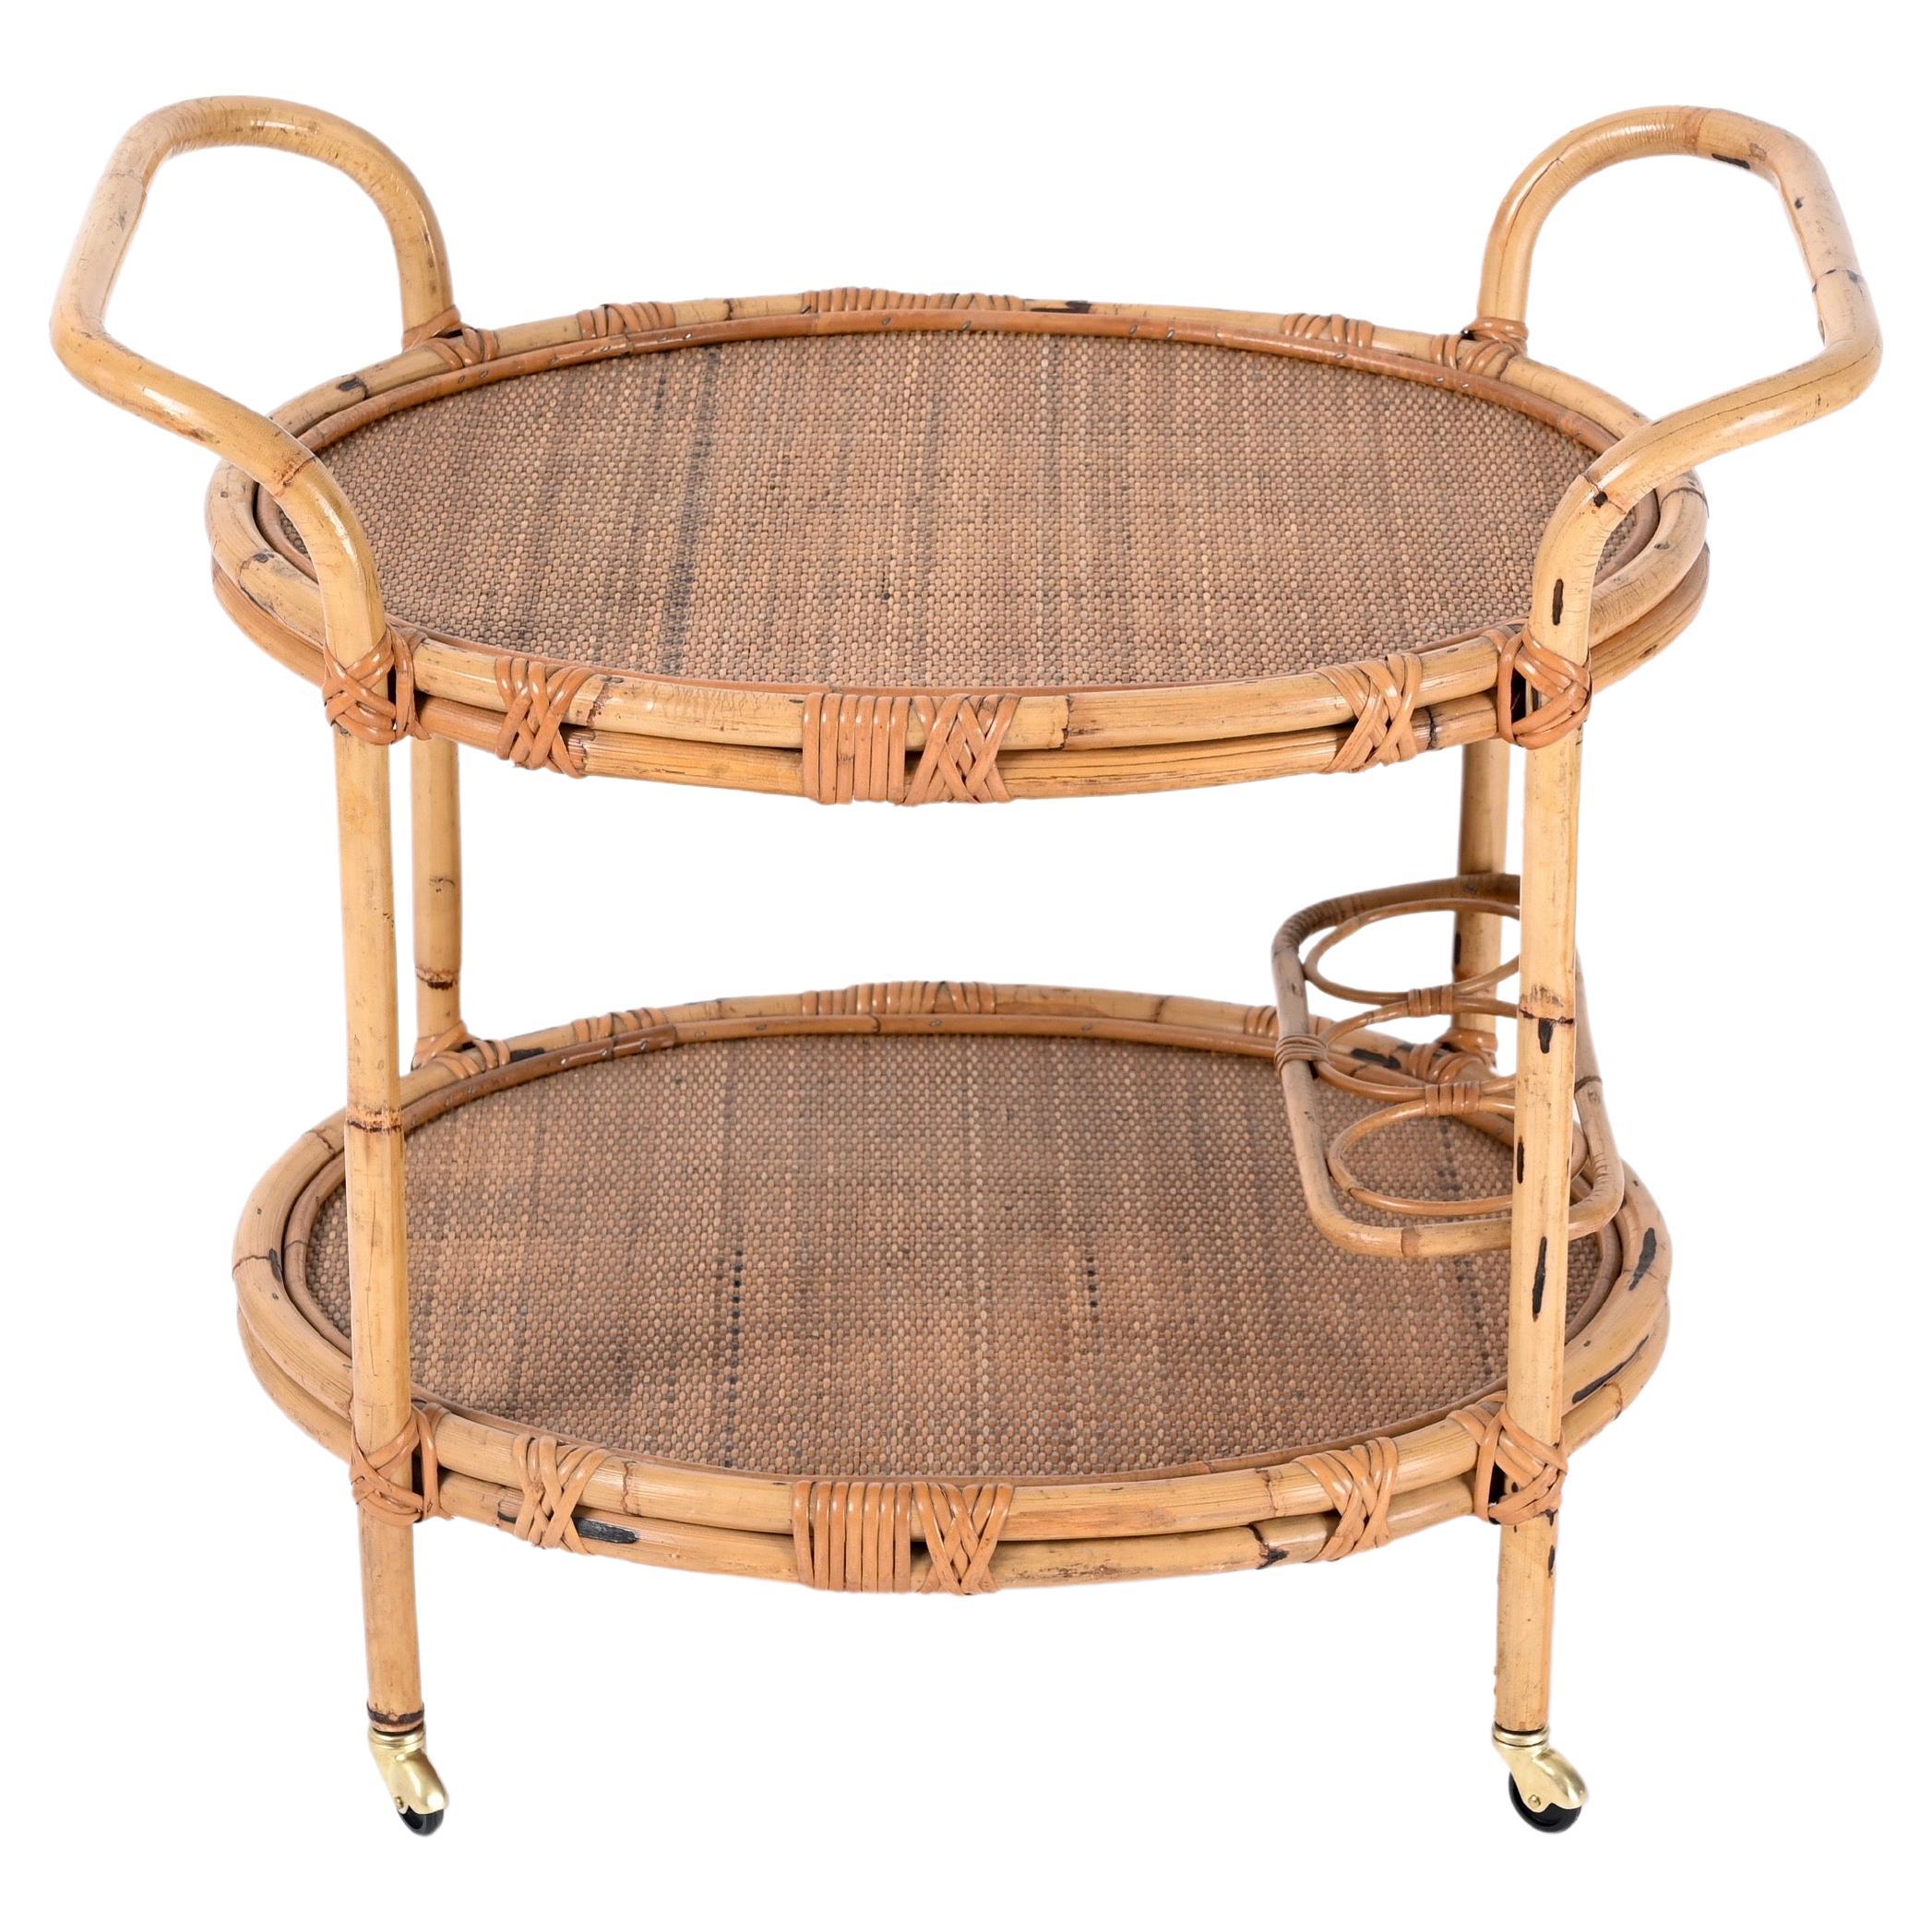 Midcentury Bamboo and Rattan Italian Oval Serving Bar Cart Trolley, 1960s